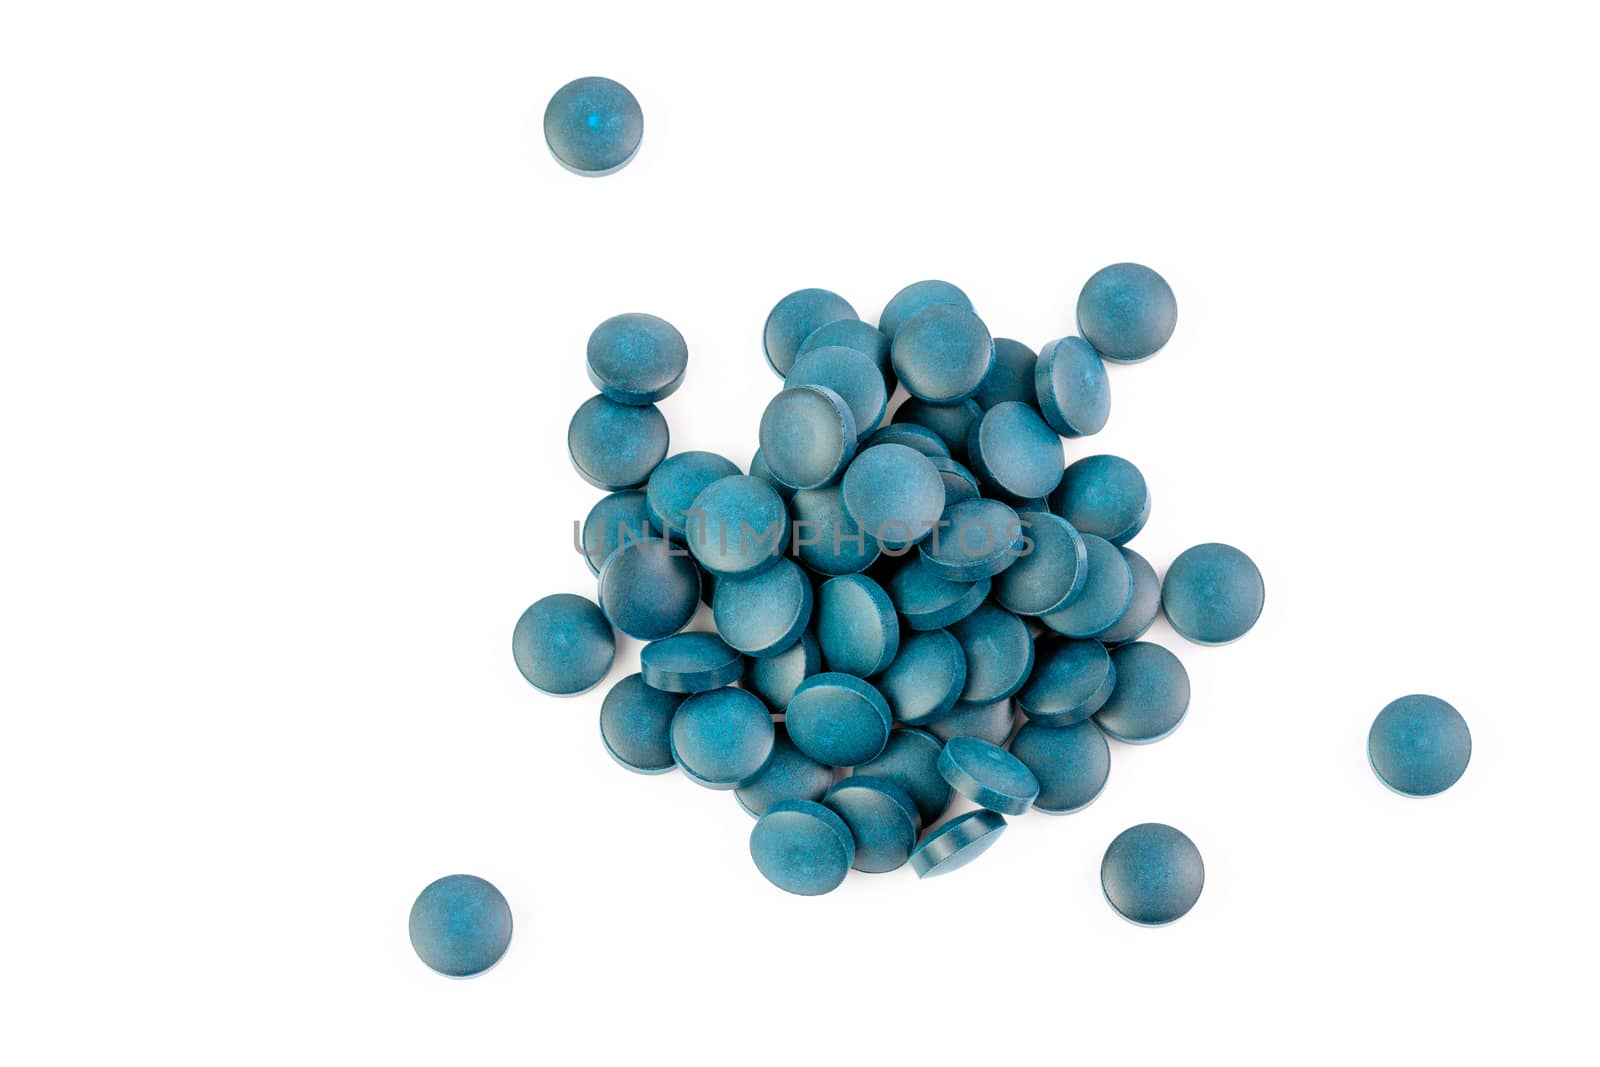 a small pile of blue compacted powder pills isolated on white background in linear perspective by z1b